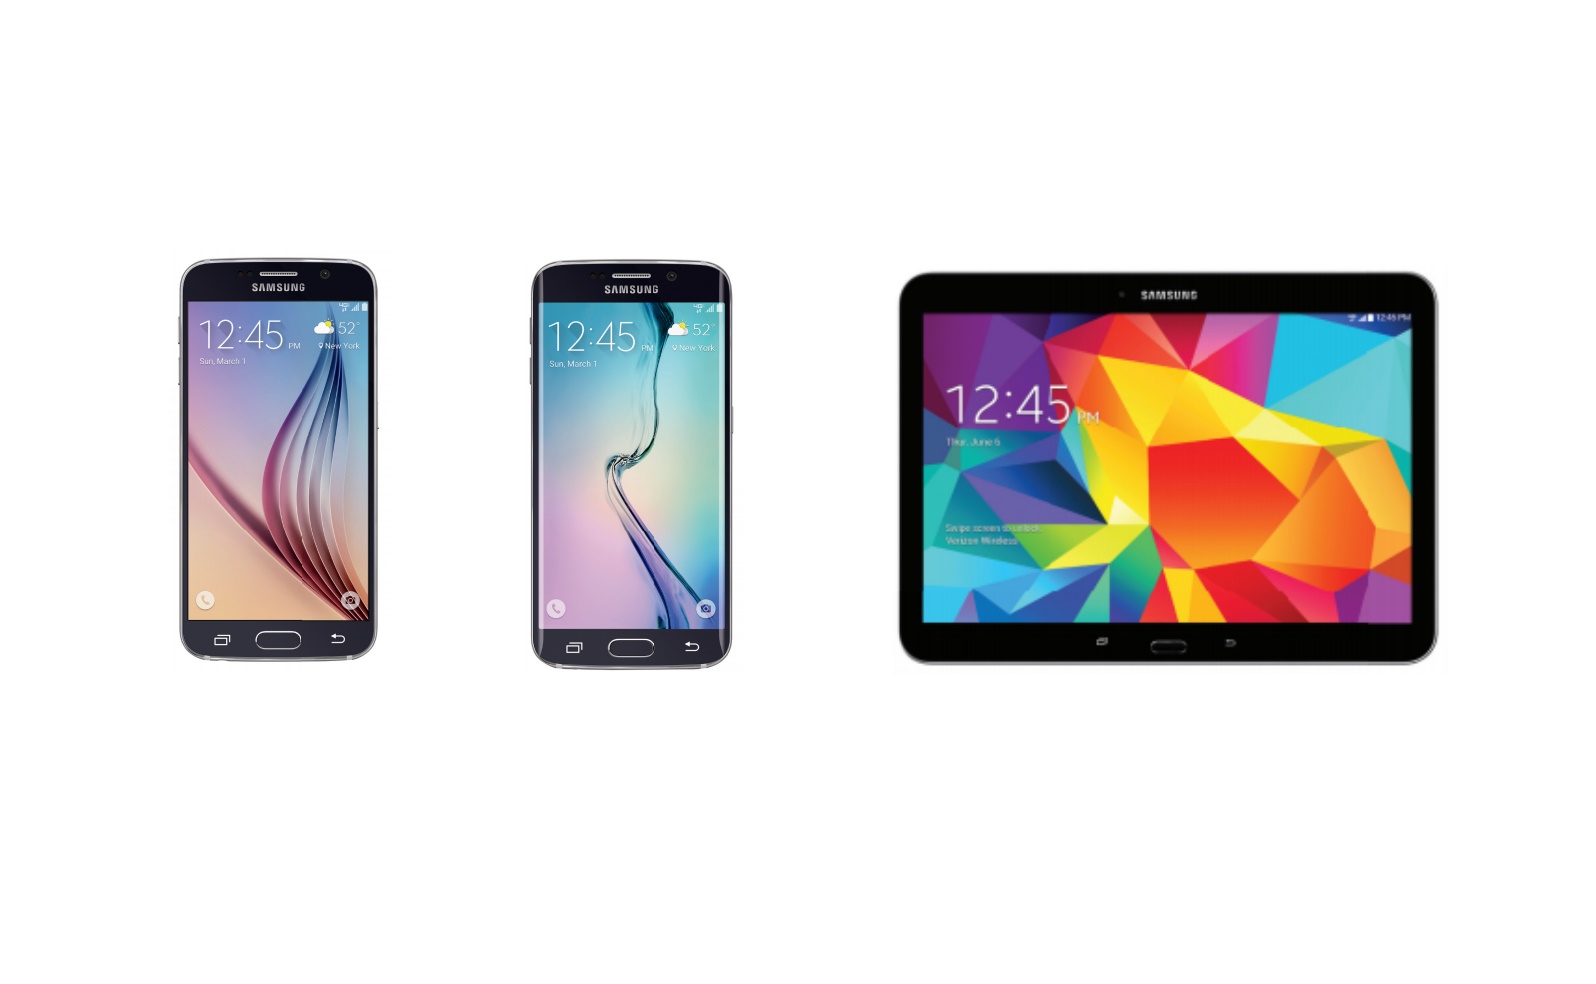 Verizon Wireless is currently distributing the latest Android version to the flagship models Samsung Galaxy S6, Galaxy S6 Edge, as well as last year’s Galaxy Tab 4 10.1.  Aside from bumping these devices up to the Android 5.1.1 build, it will also address a recent bug called StageFright.